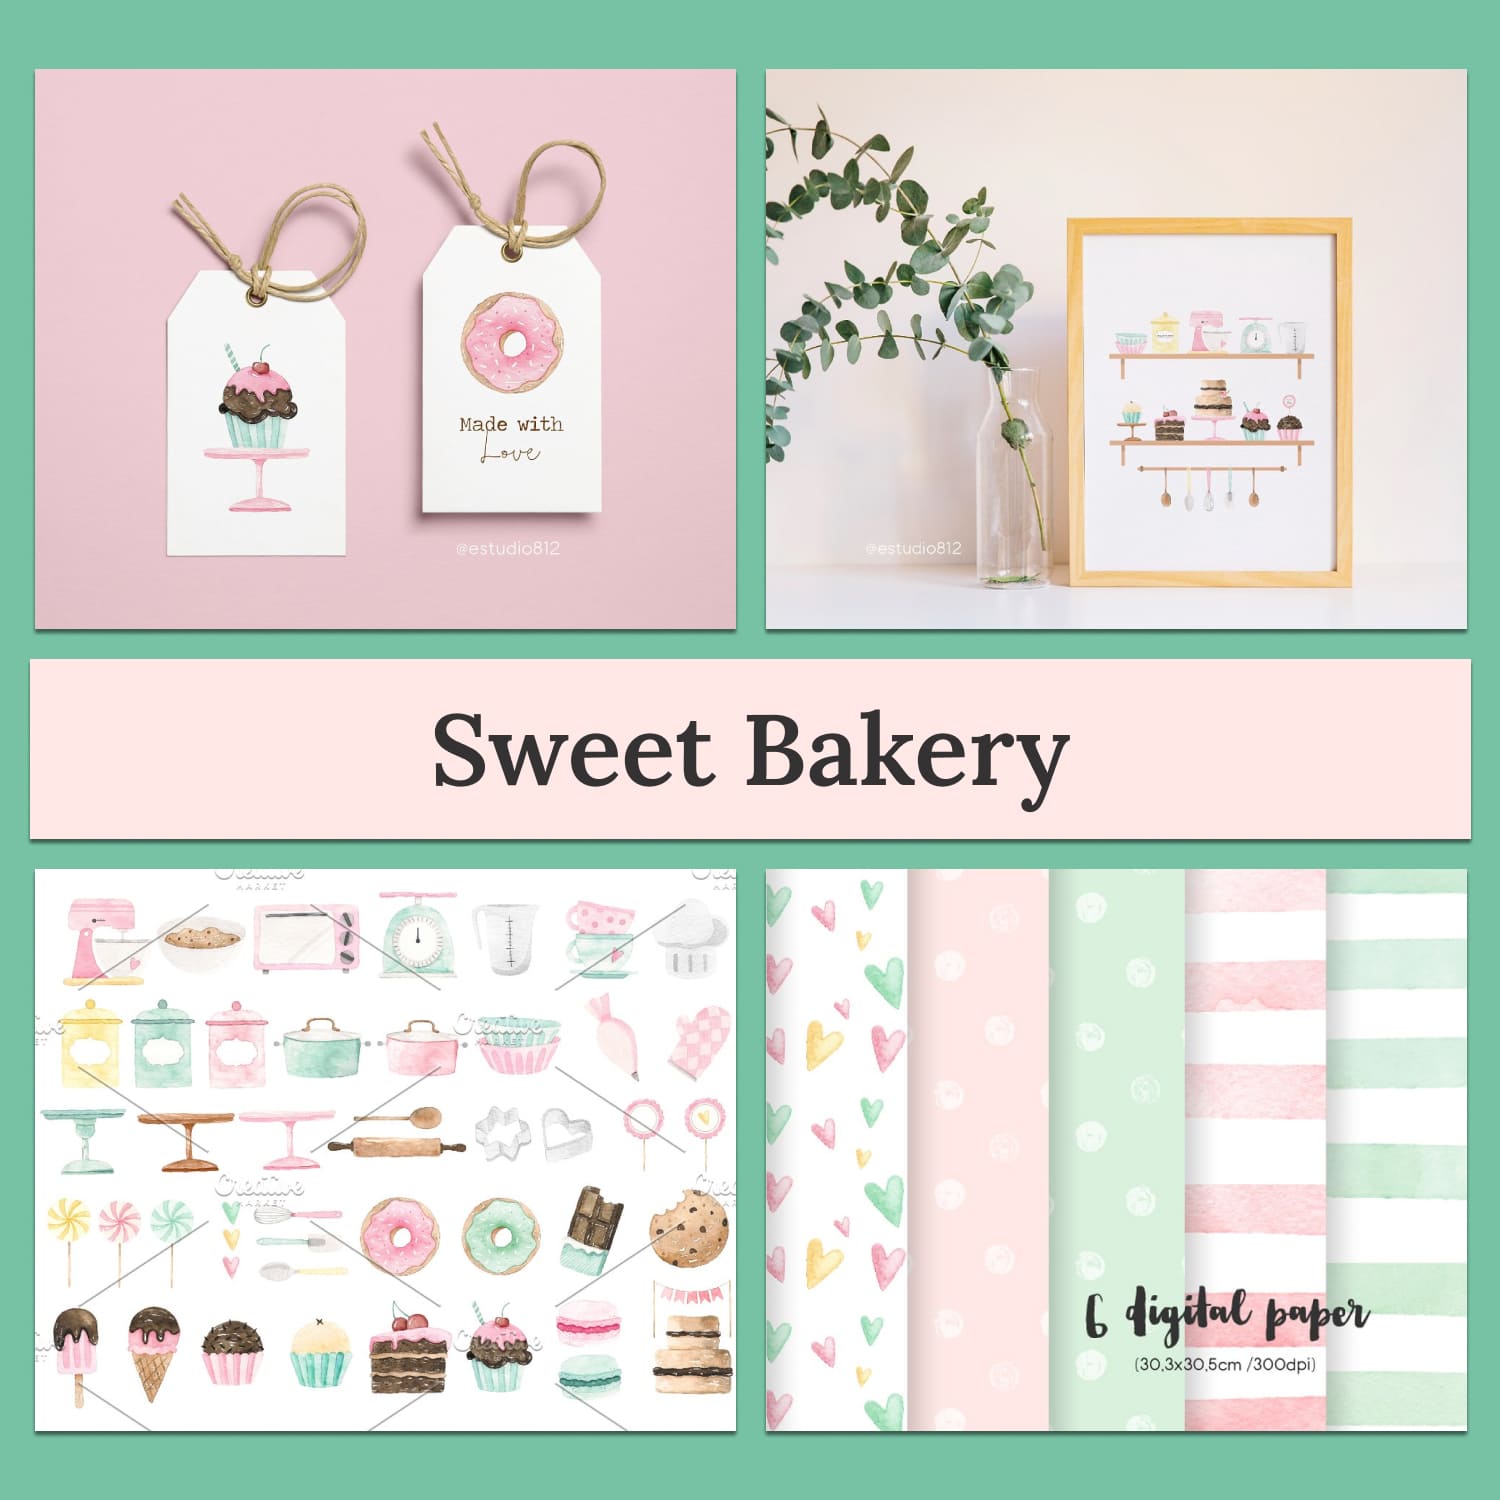 Sweet bakery - main image preview.